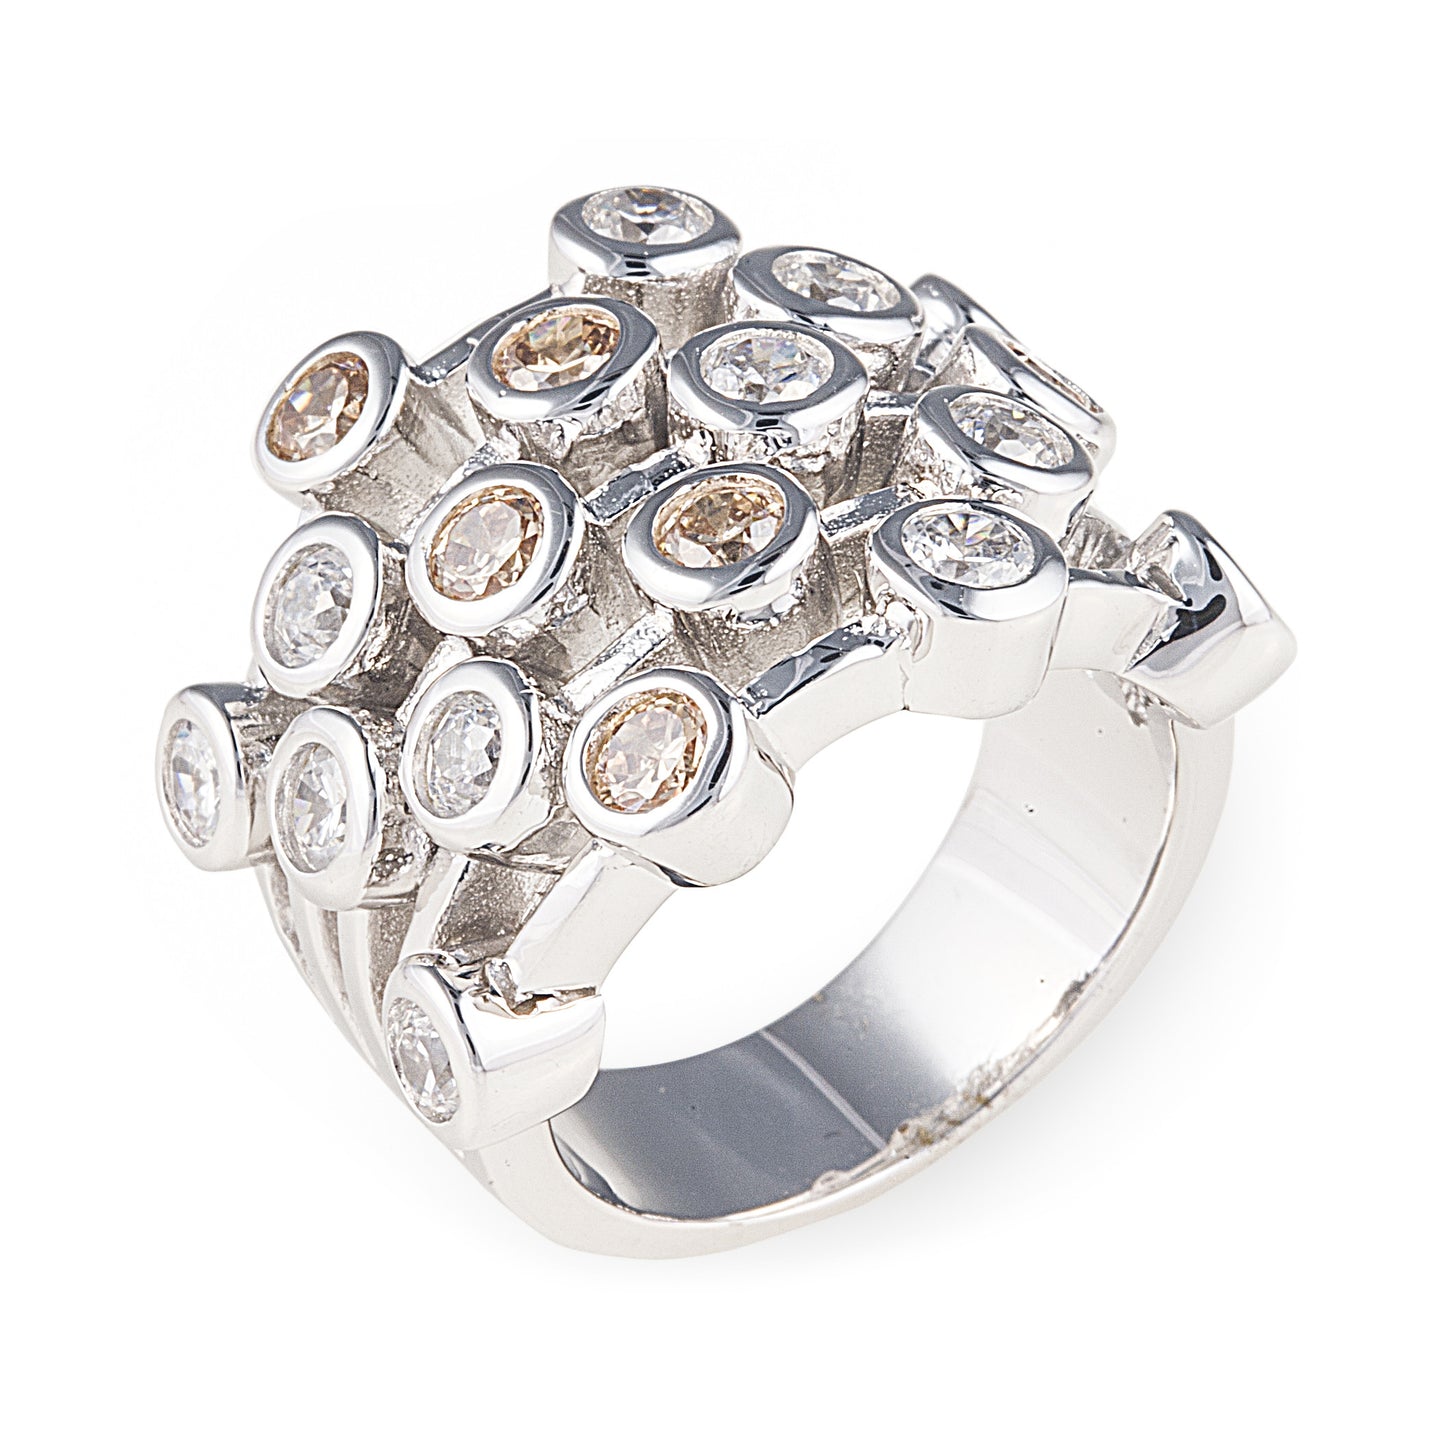 Sunset Mare Ring. A unique 925 sterling silver ring whose design is inspired by an ocean sunset featuring a pattern created with set-in champagne and clear cubic zirconia stones. Select your ring size for the perfect fit. Worldwide shipping. 